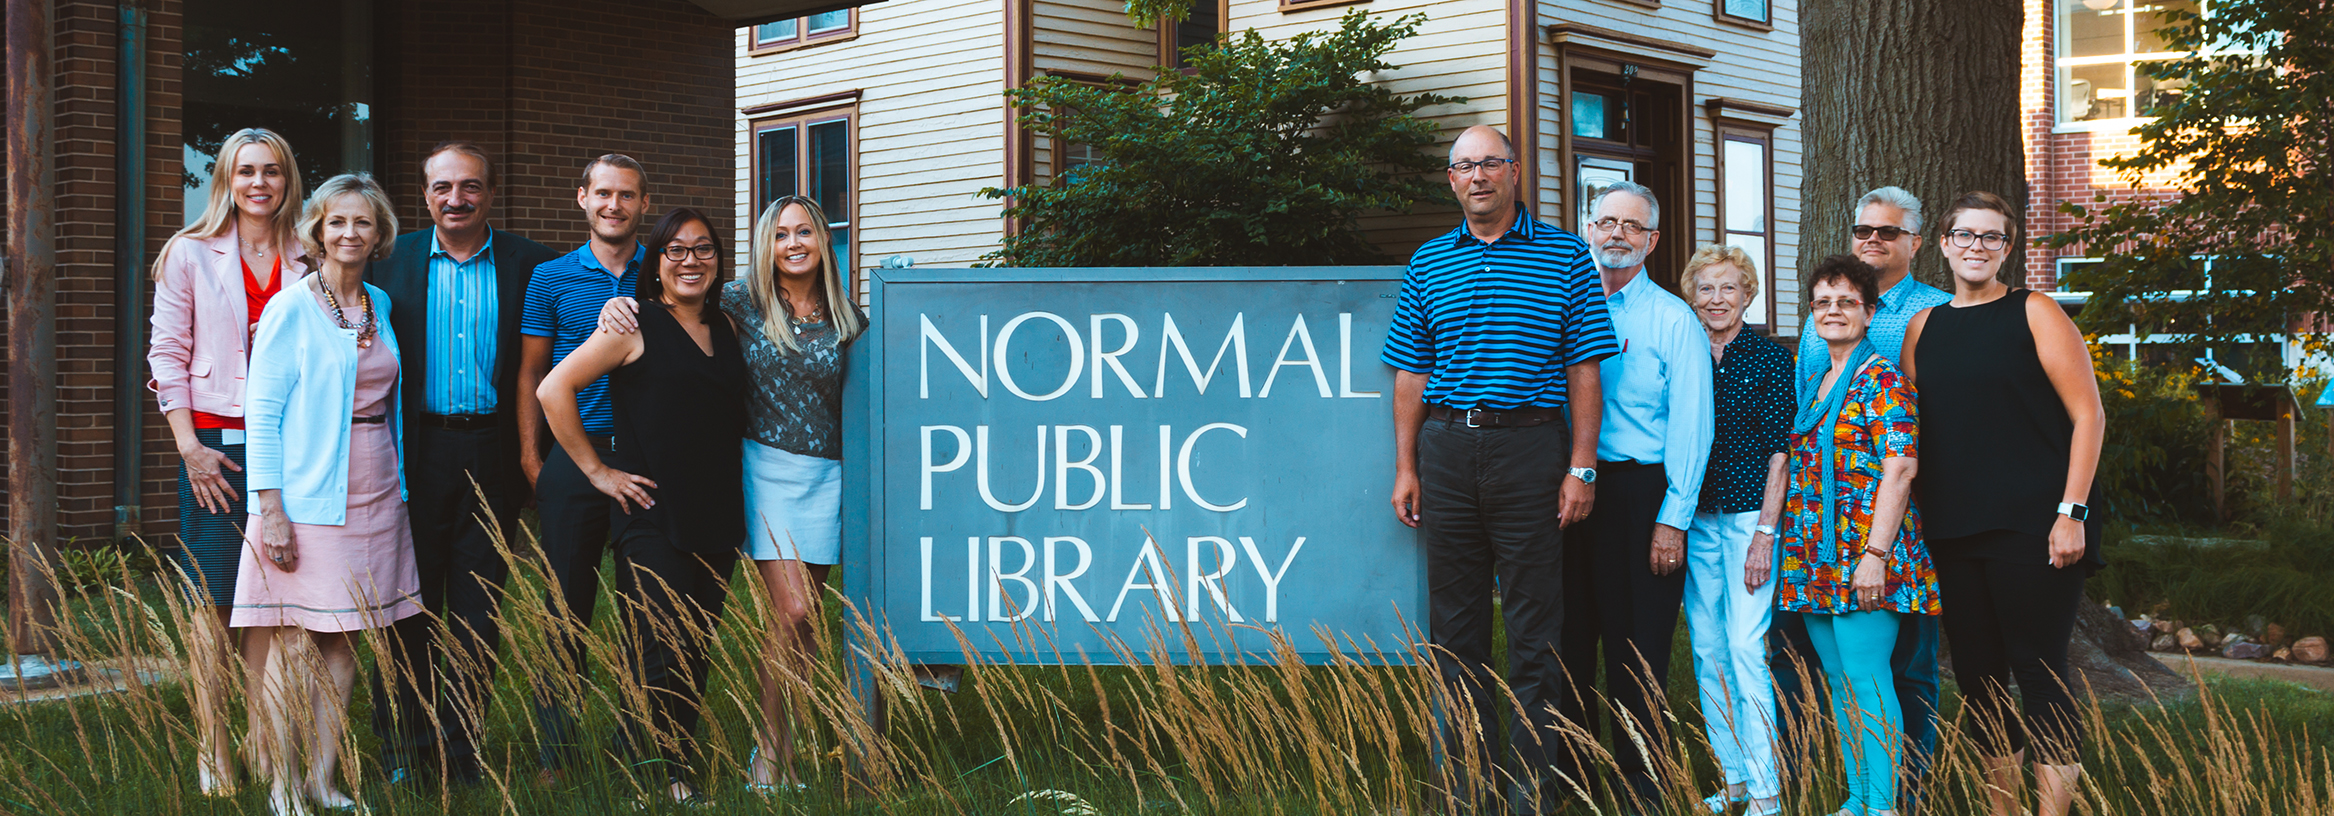 image of the Normal Public Library Foundation Board in front of the library's sign